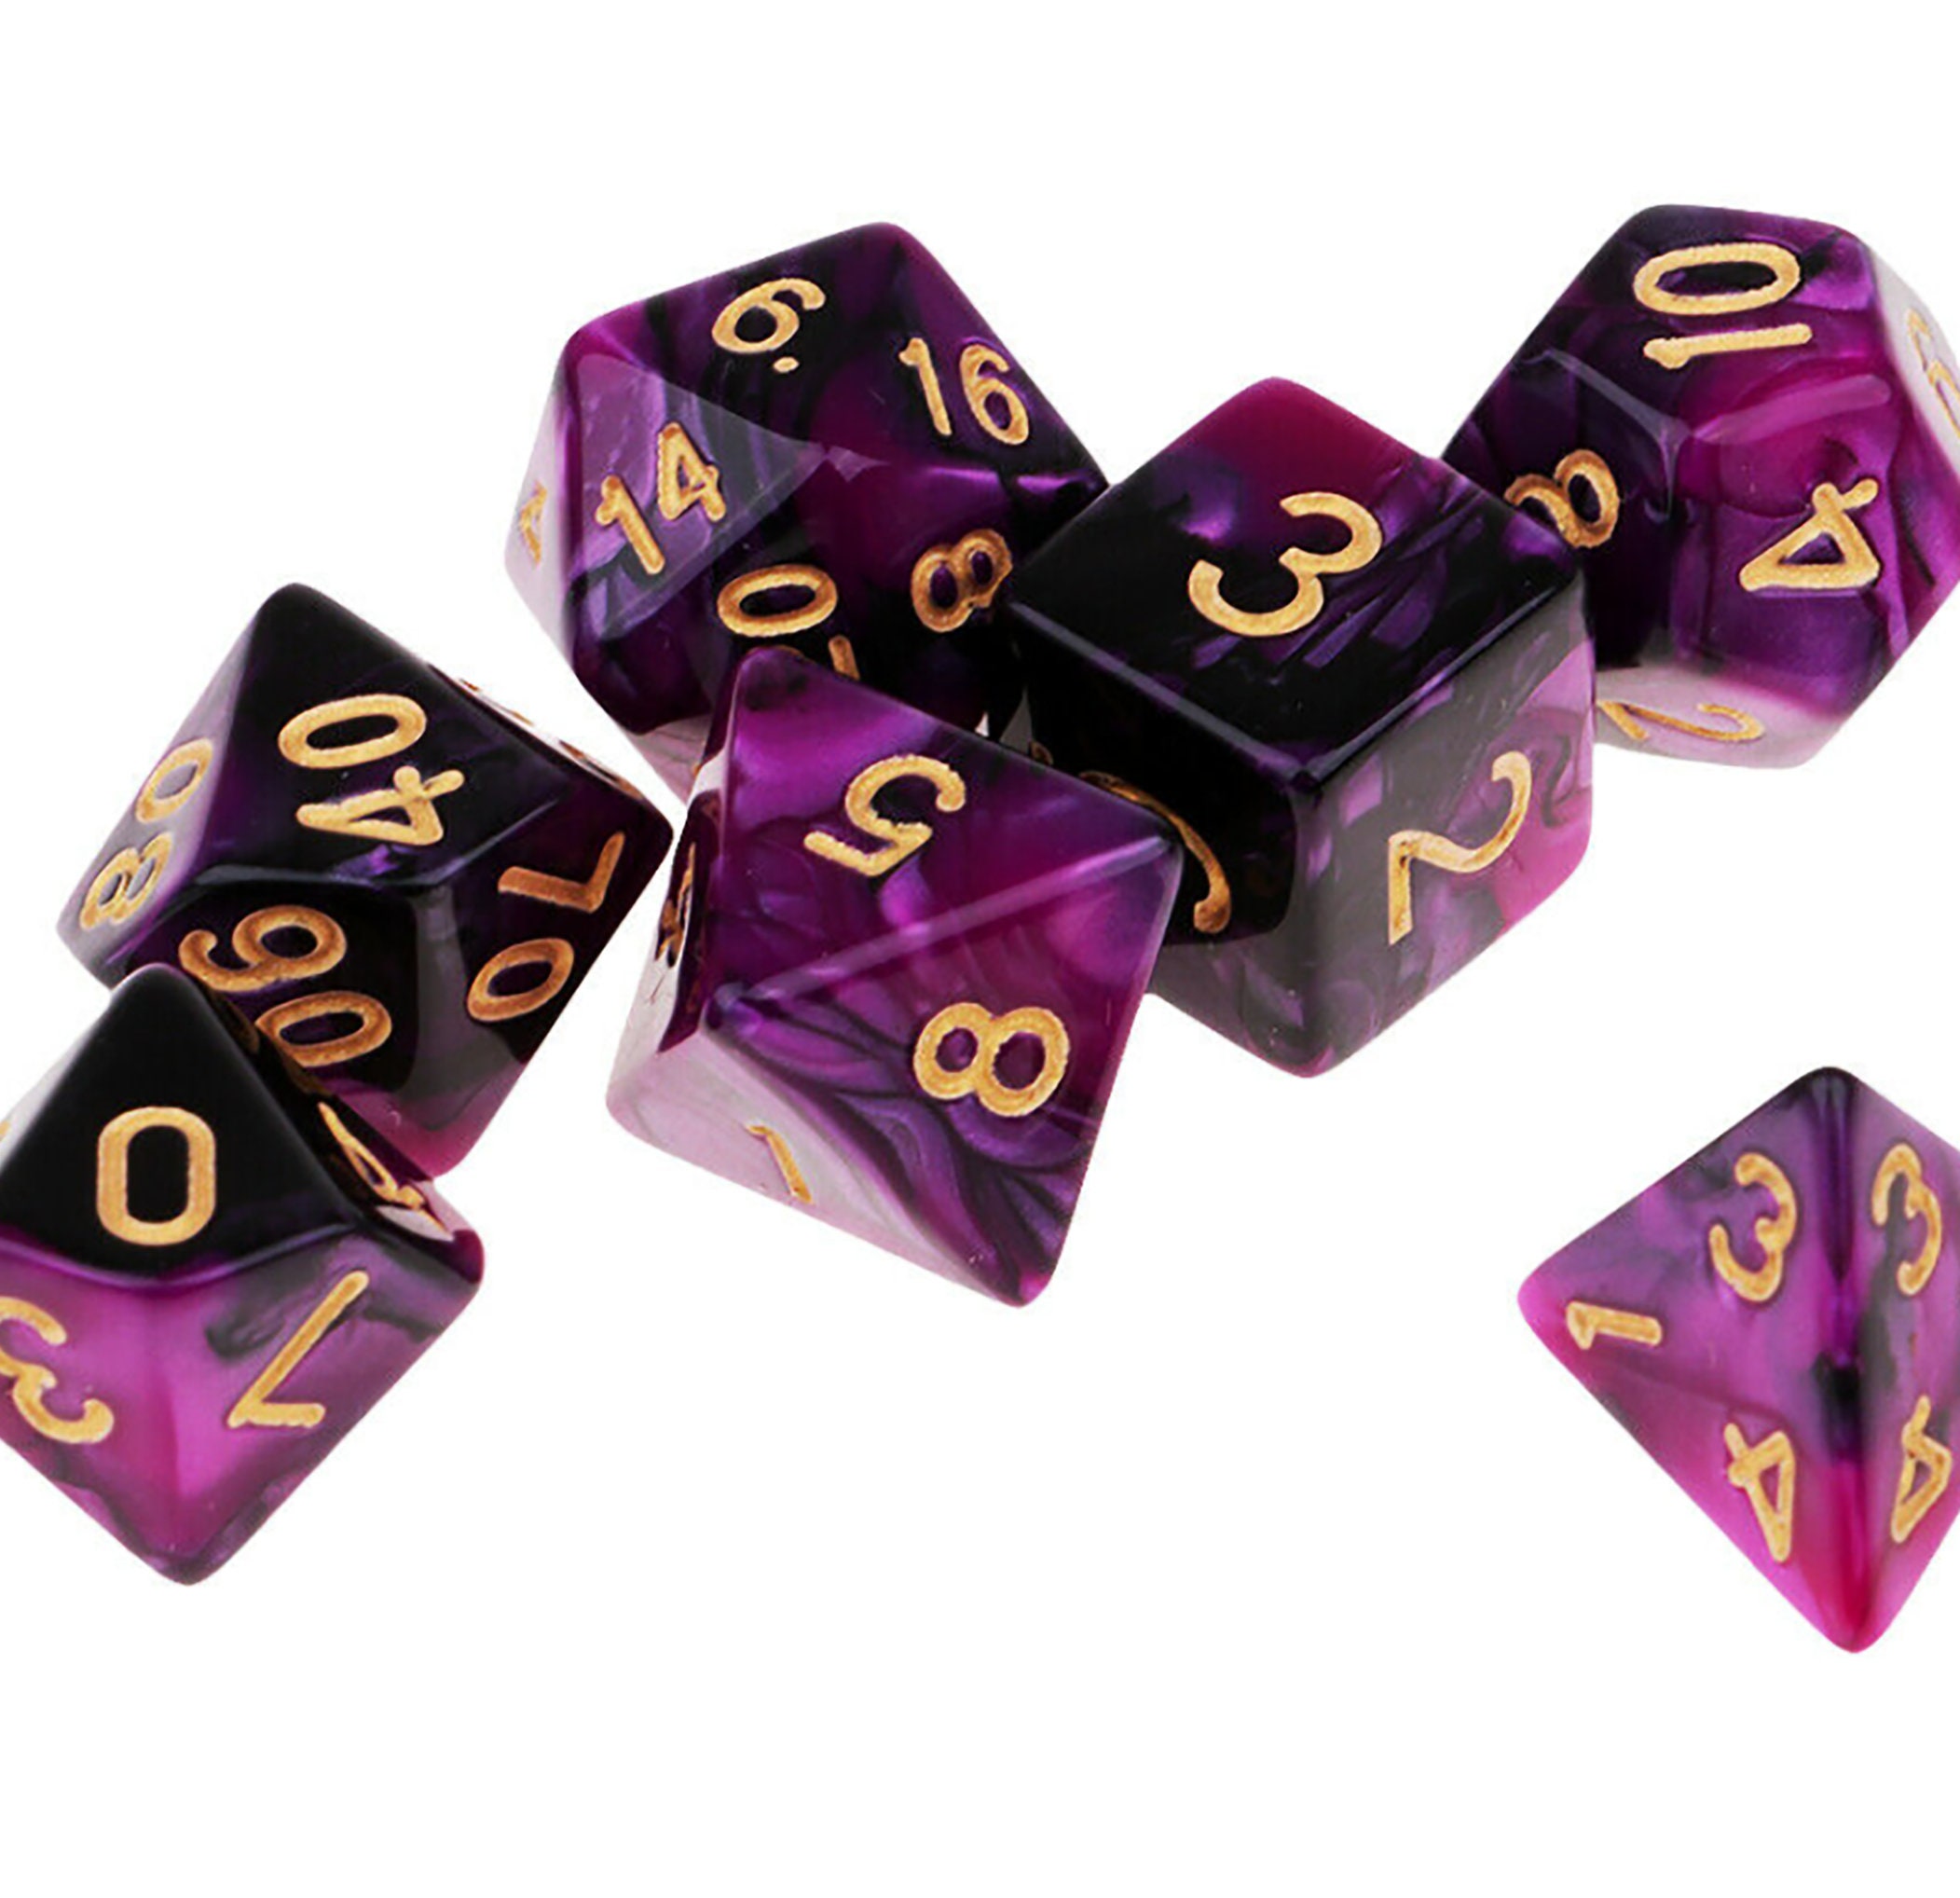 7pcs Sided Die D4 D6 D8 D10 D12 D20 DUNGEONS&DRAGONS D&D RPG Poly Dice Game 